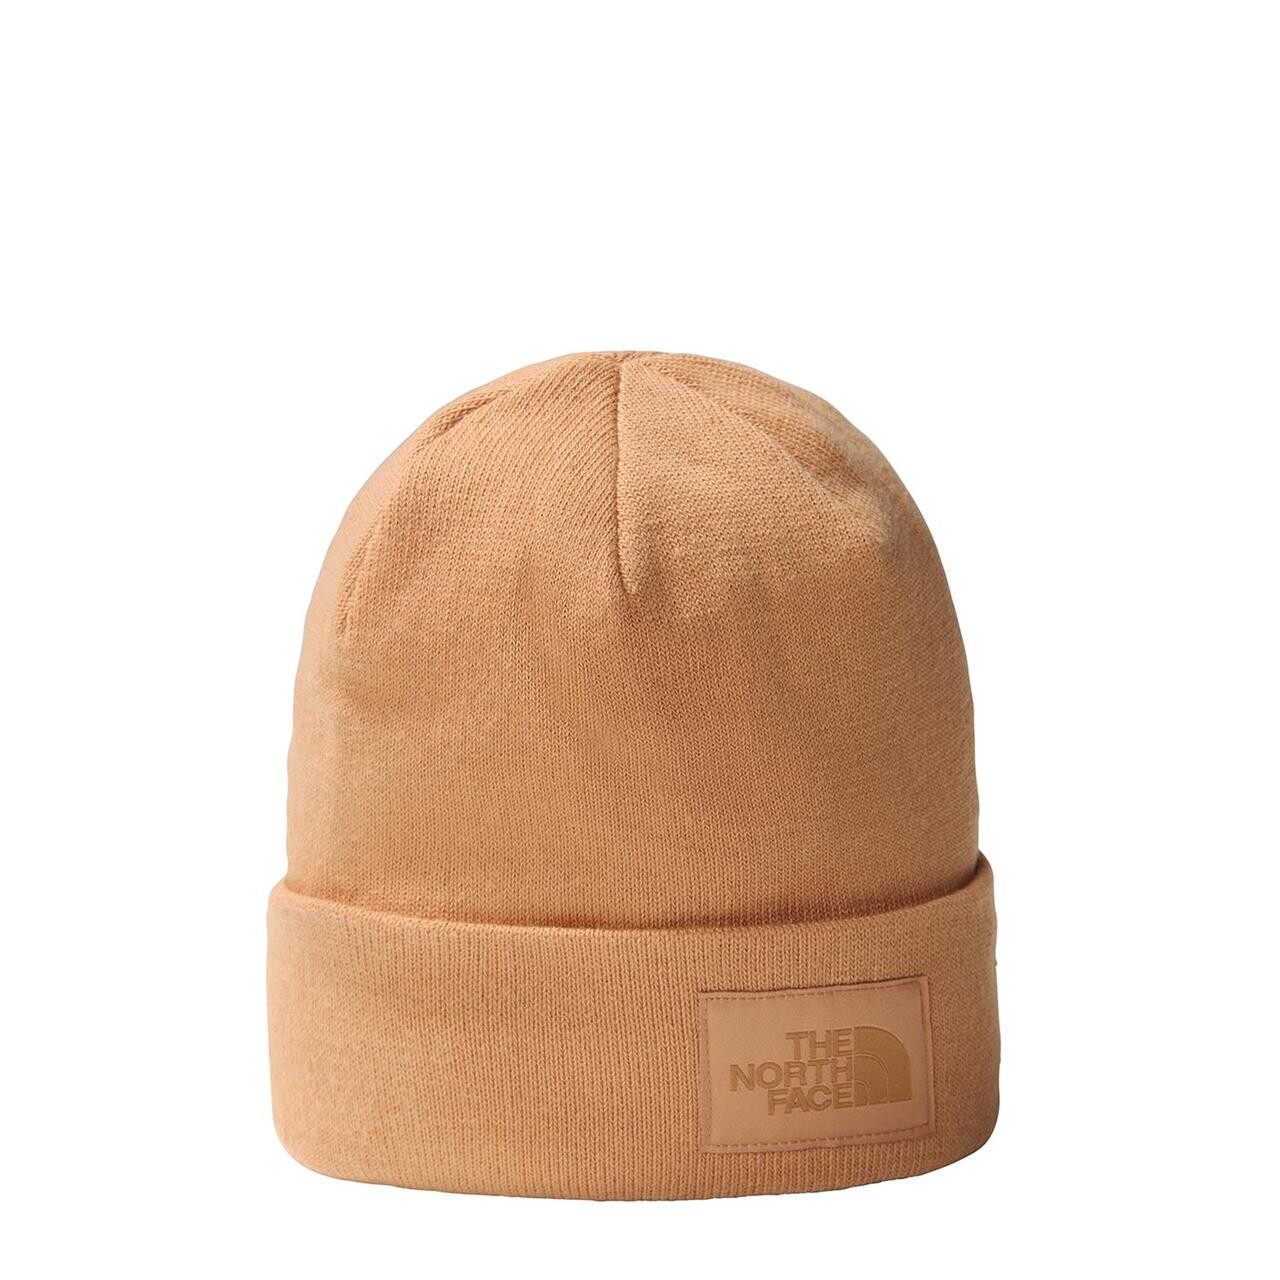 7: The North Face Dock Worker Recycled Beanie (Beige (ALMOND BUTTER) One size)